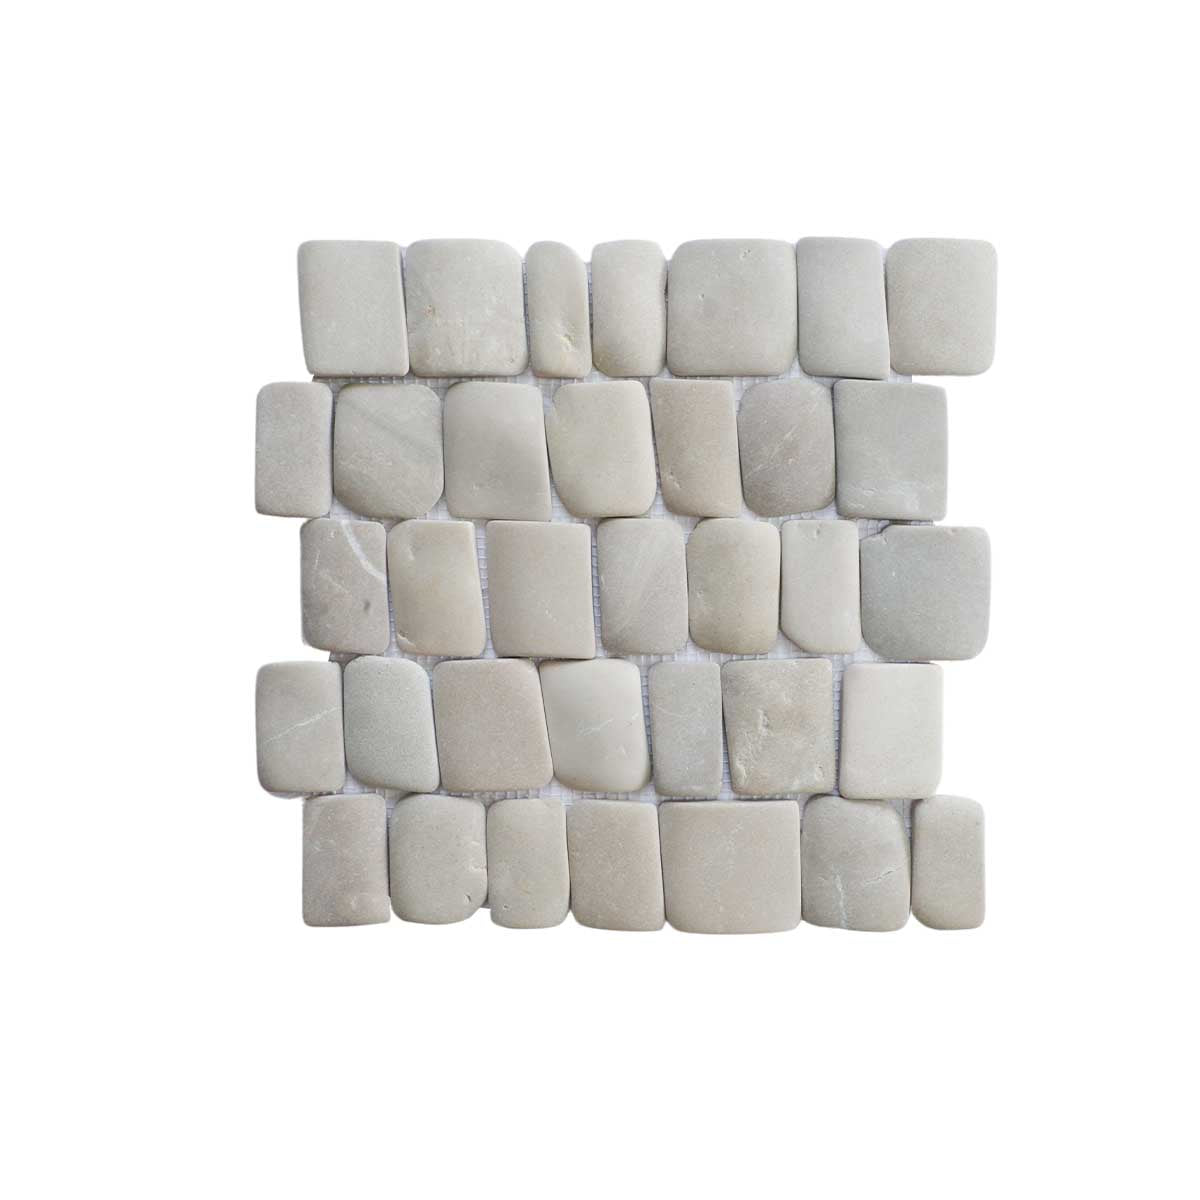 Tan Stone Mosaic Tile for Wall and Floor, Canine Natural Stone Tile